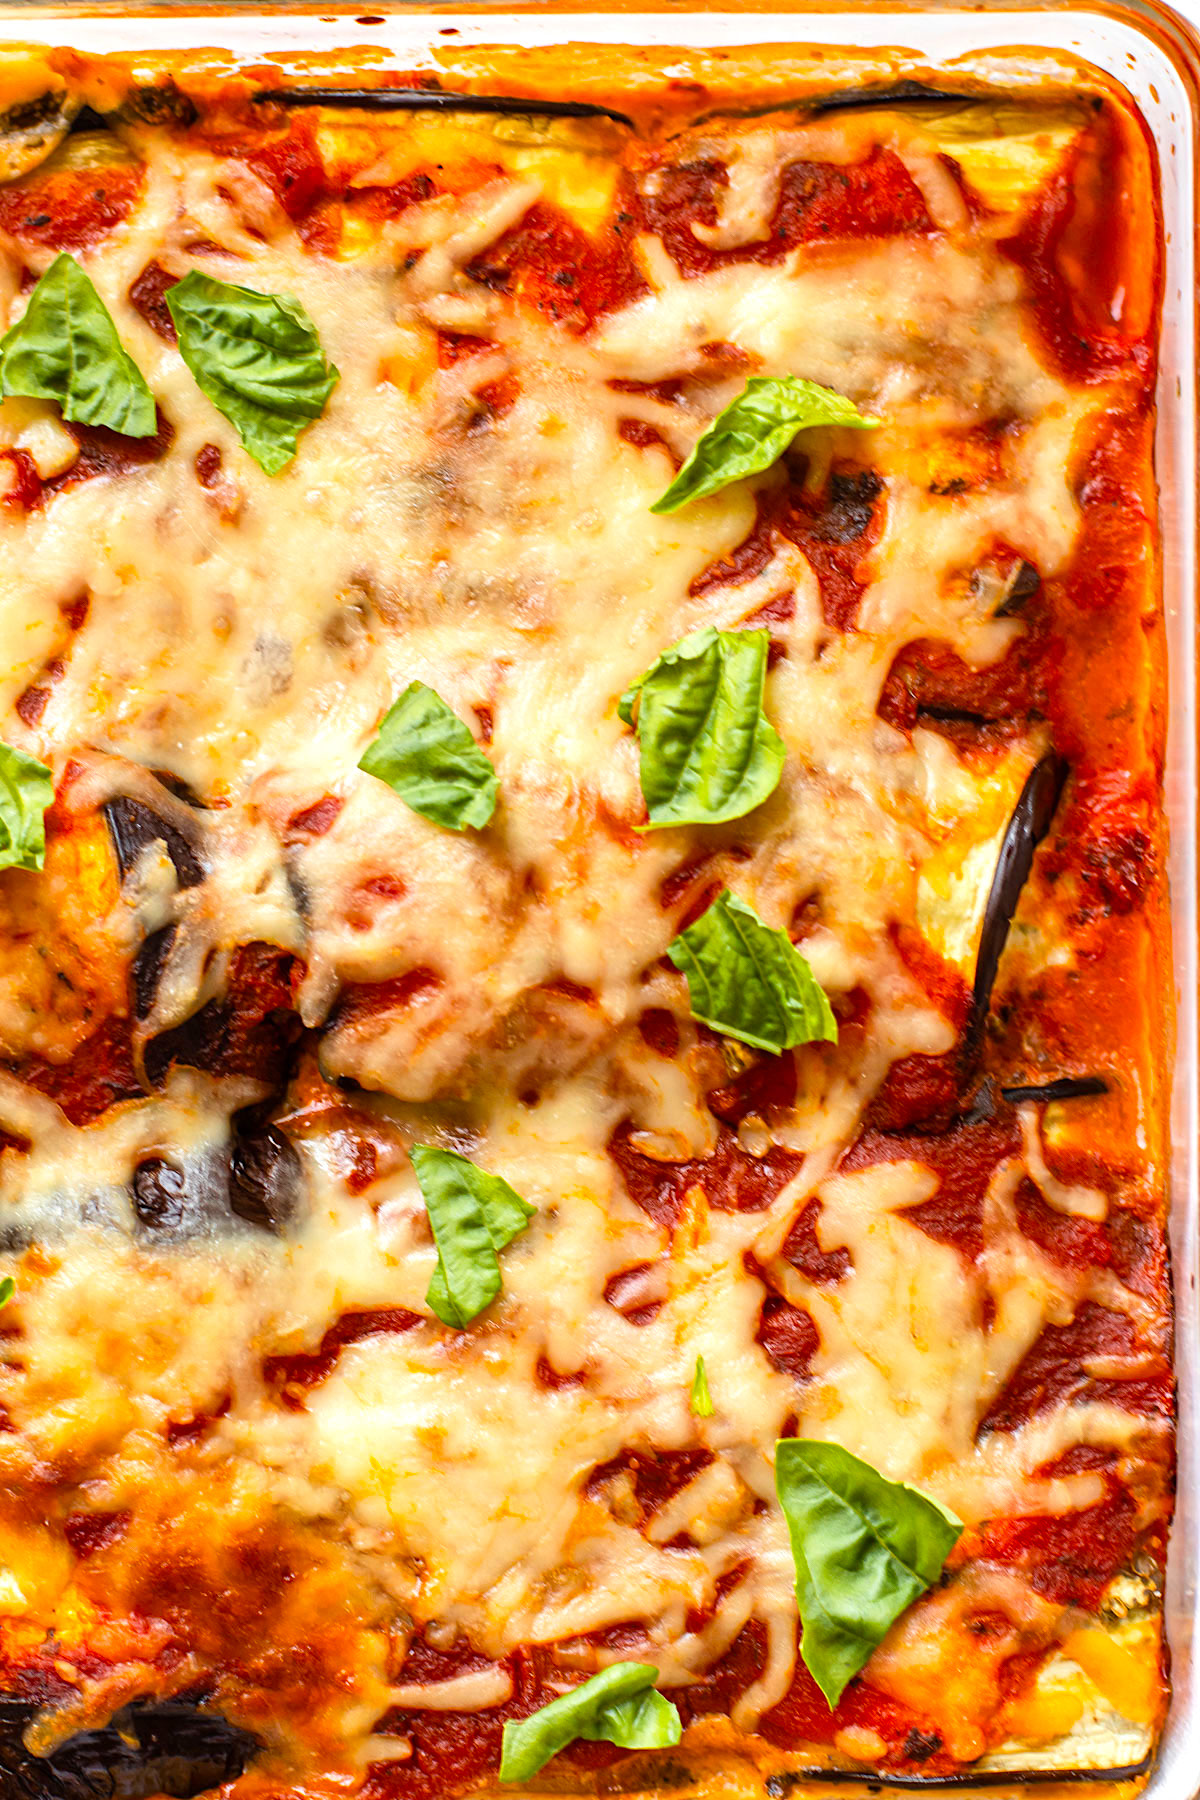 Eggplant rollatini bake with melty cheese and basil.